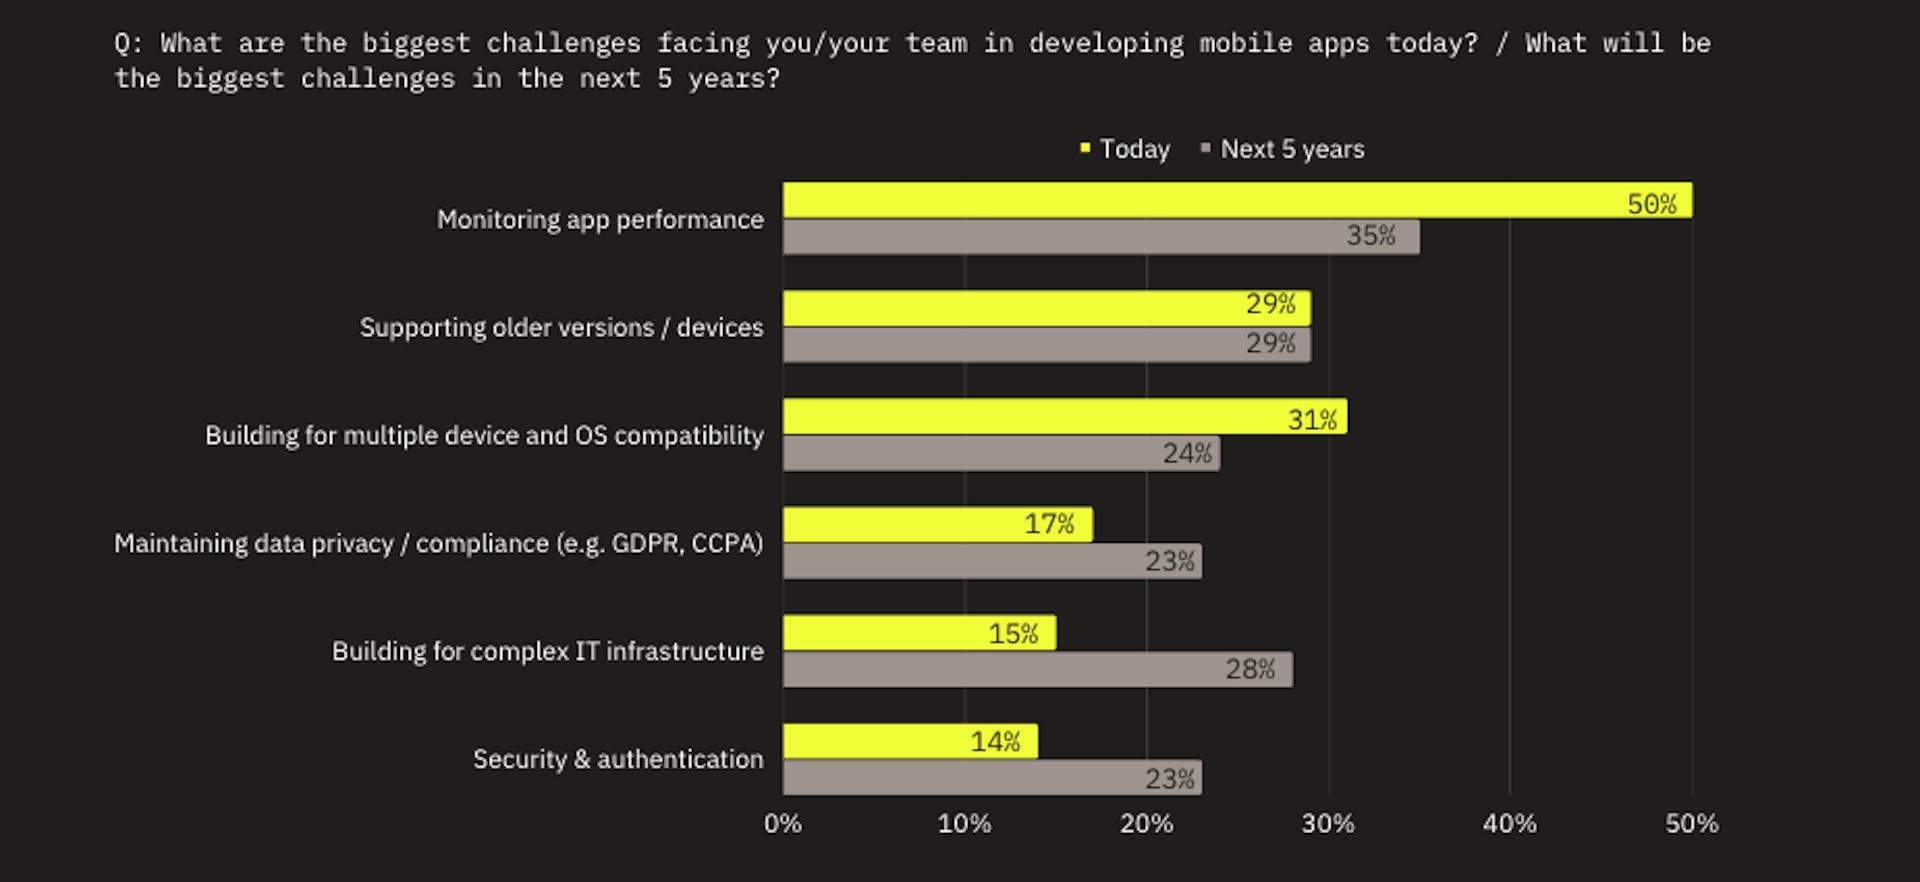 % of mobile engineers who say the following things are the biggest challenges facing them/their teams today / int he next 5 years